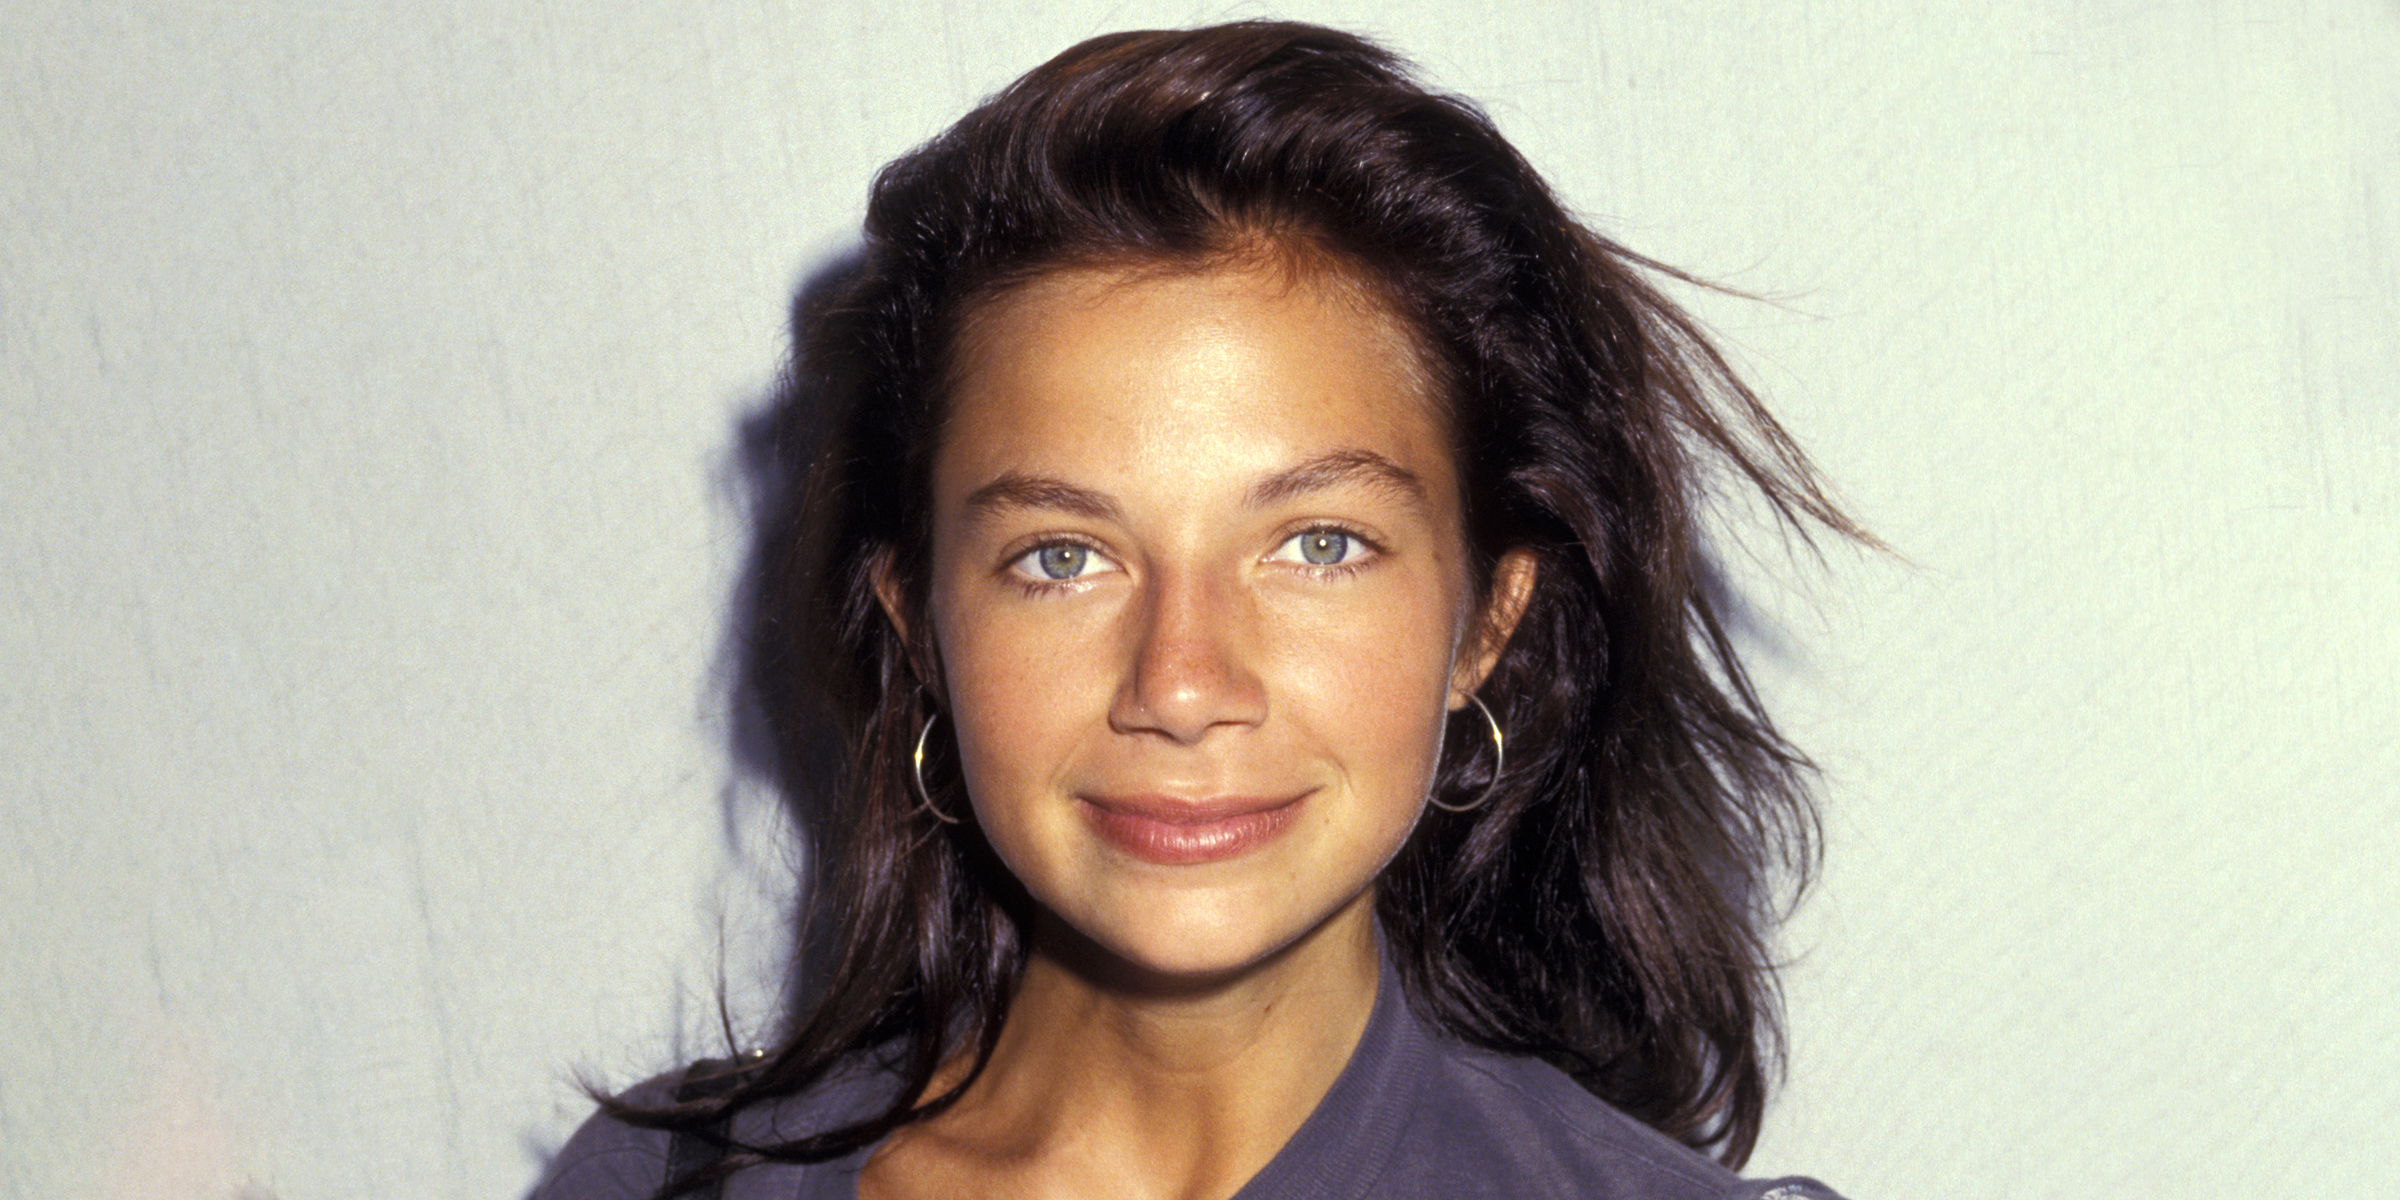 Justine Bateman in the '80s | Source: Getty Images